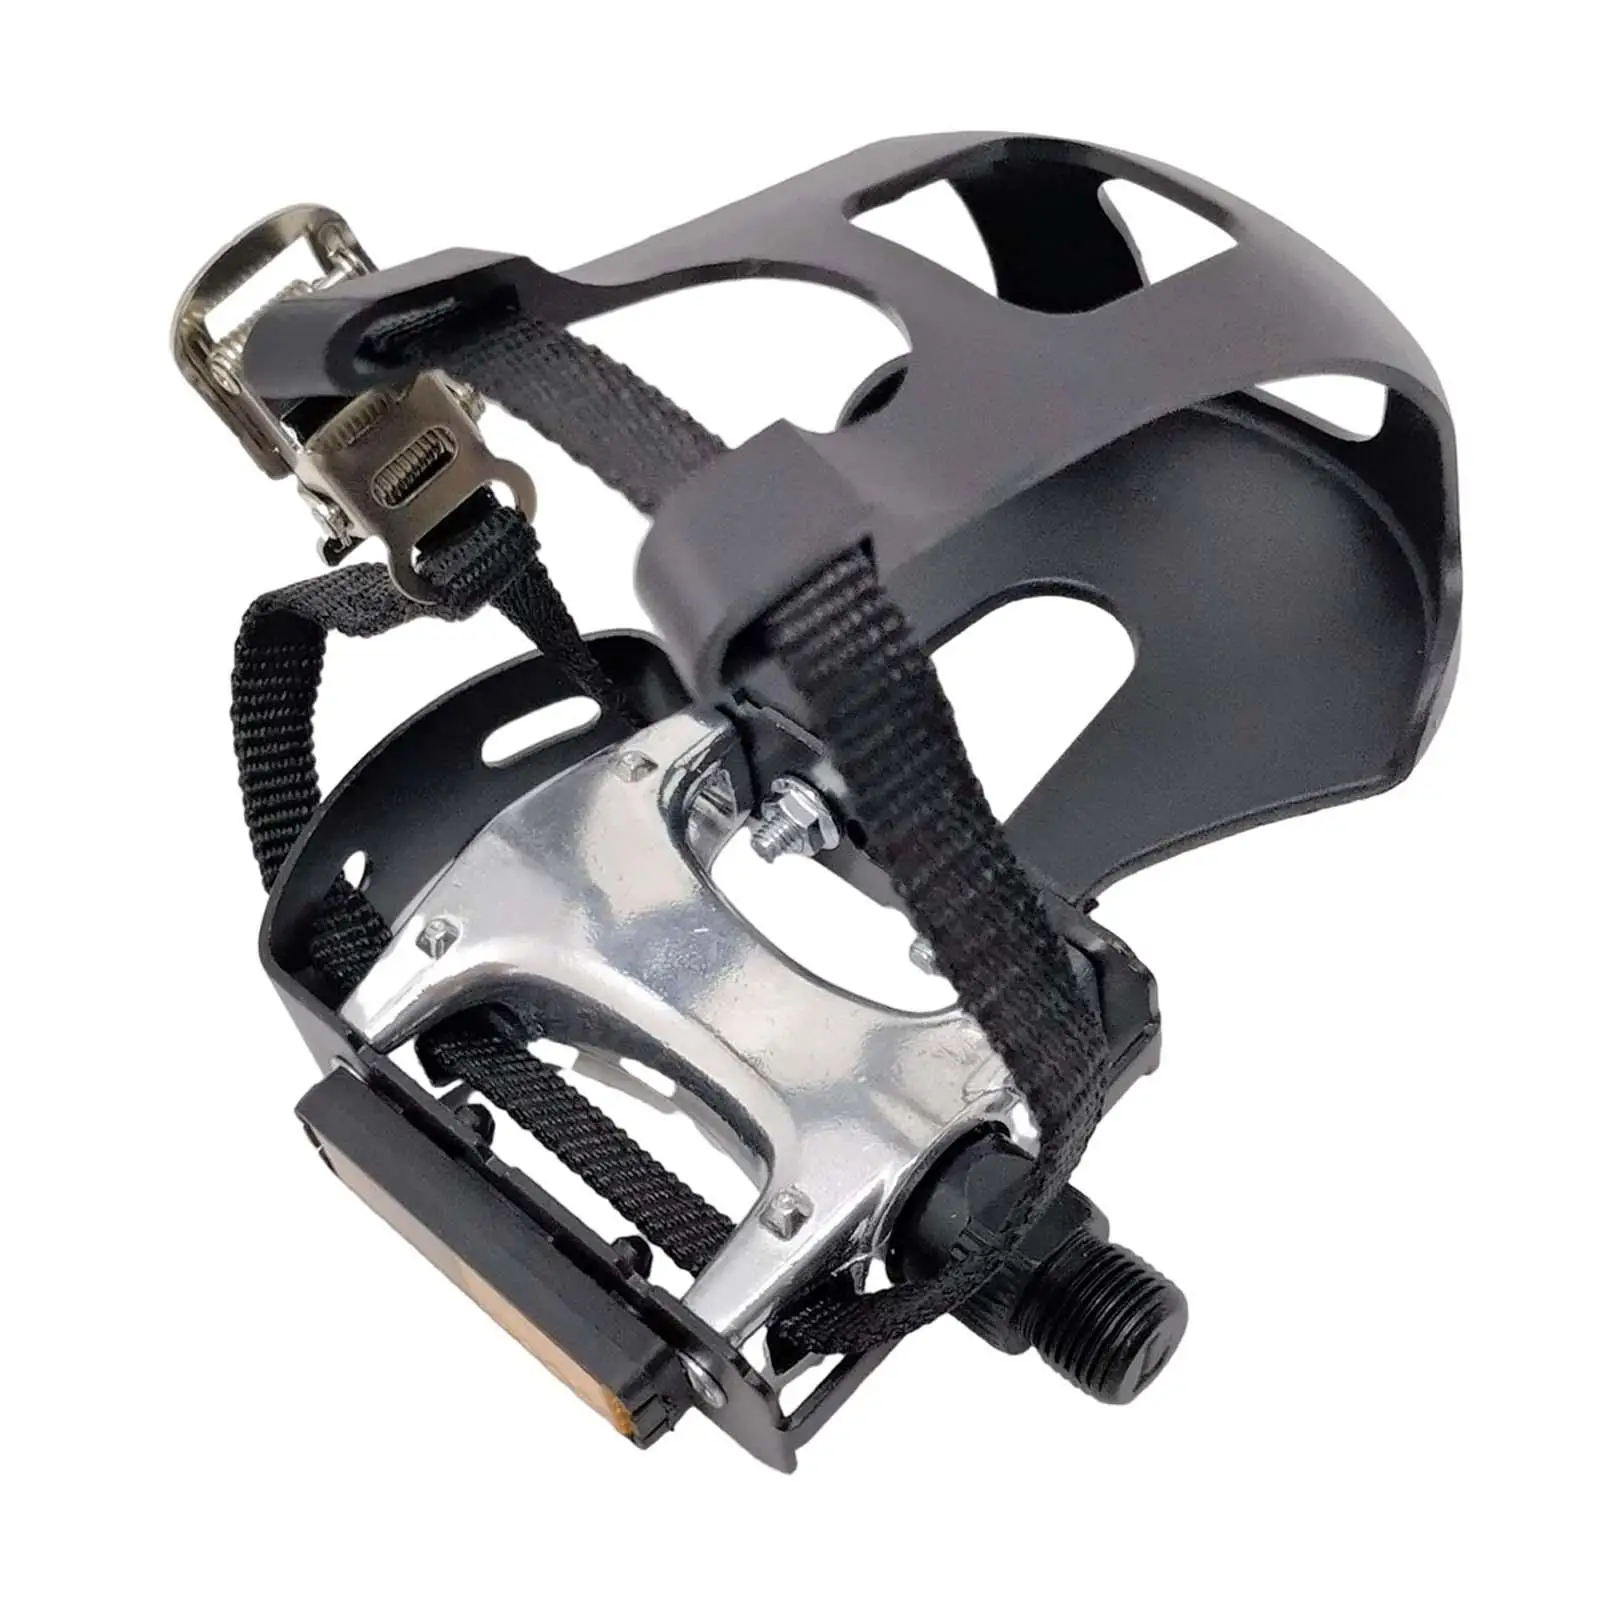 Bike Pedals with Toe Clips and Straps Bicycle Pedals for Indoor Riding Parts